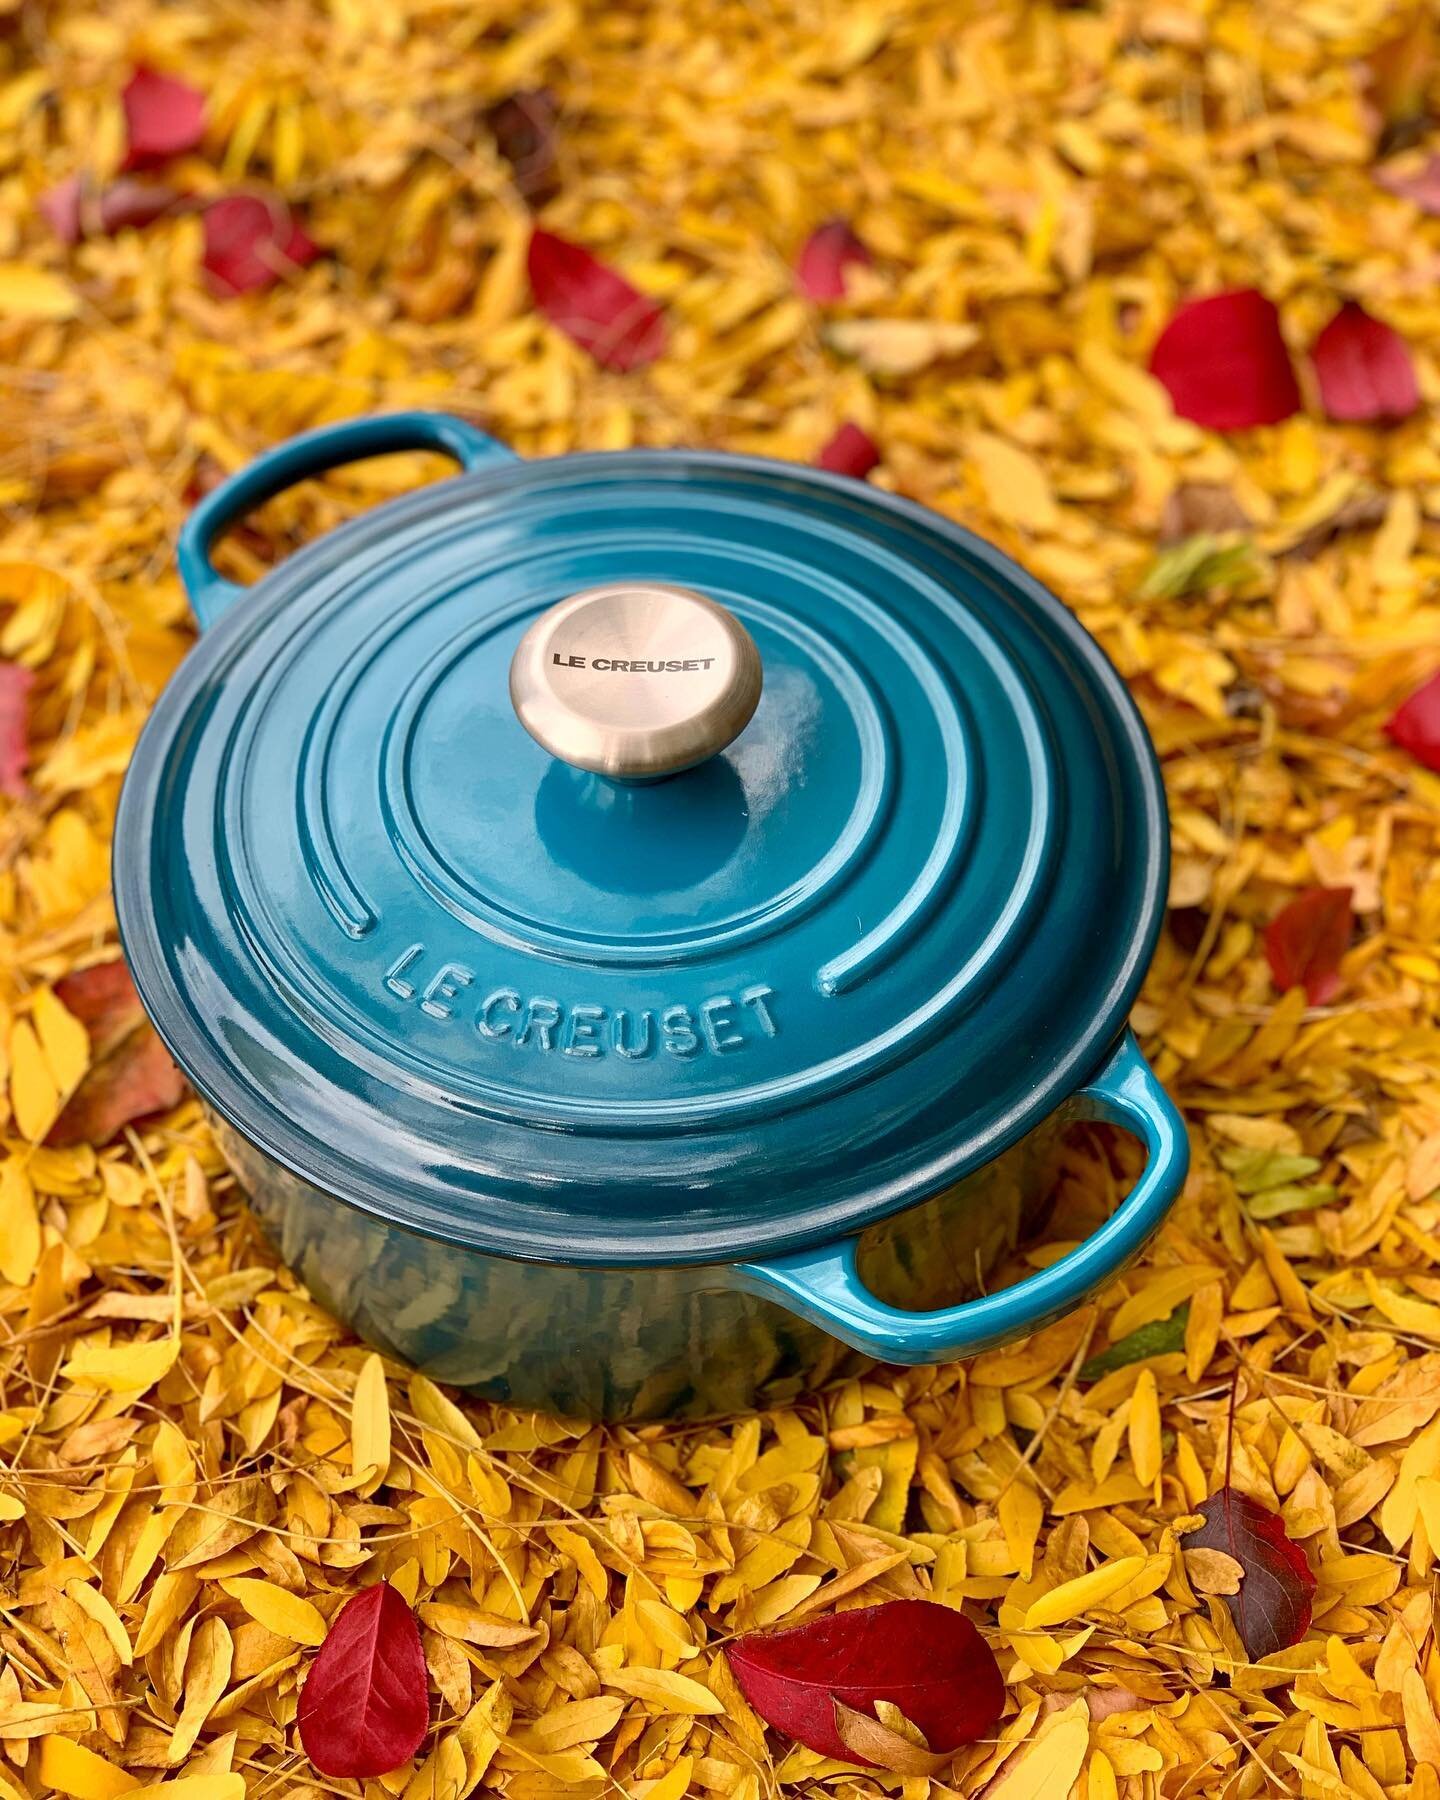 GIVEAWAY: Just in time for cozy season, @lecreuset and @mailleus have teamed up for an ooh la la-worthy giveaway. Enter for a chance to win one of three (3) Le Creuset 4.5-quart Dutch Ovens (in just-released color Deep Teal) and gourmet Maille mustar